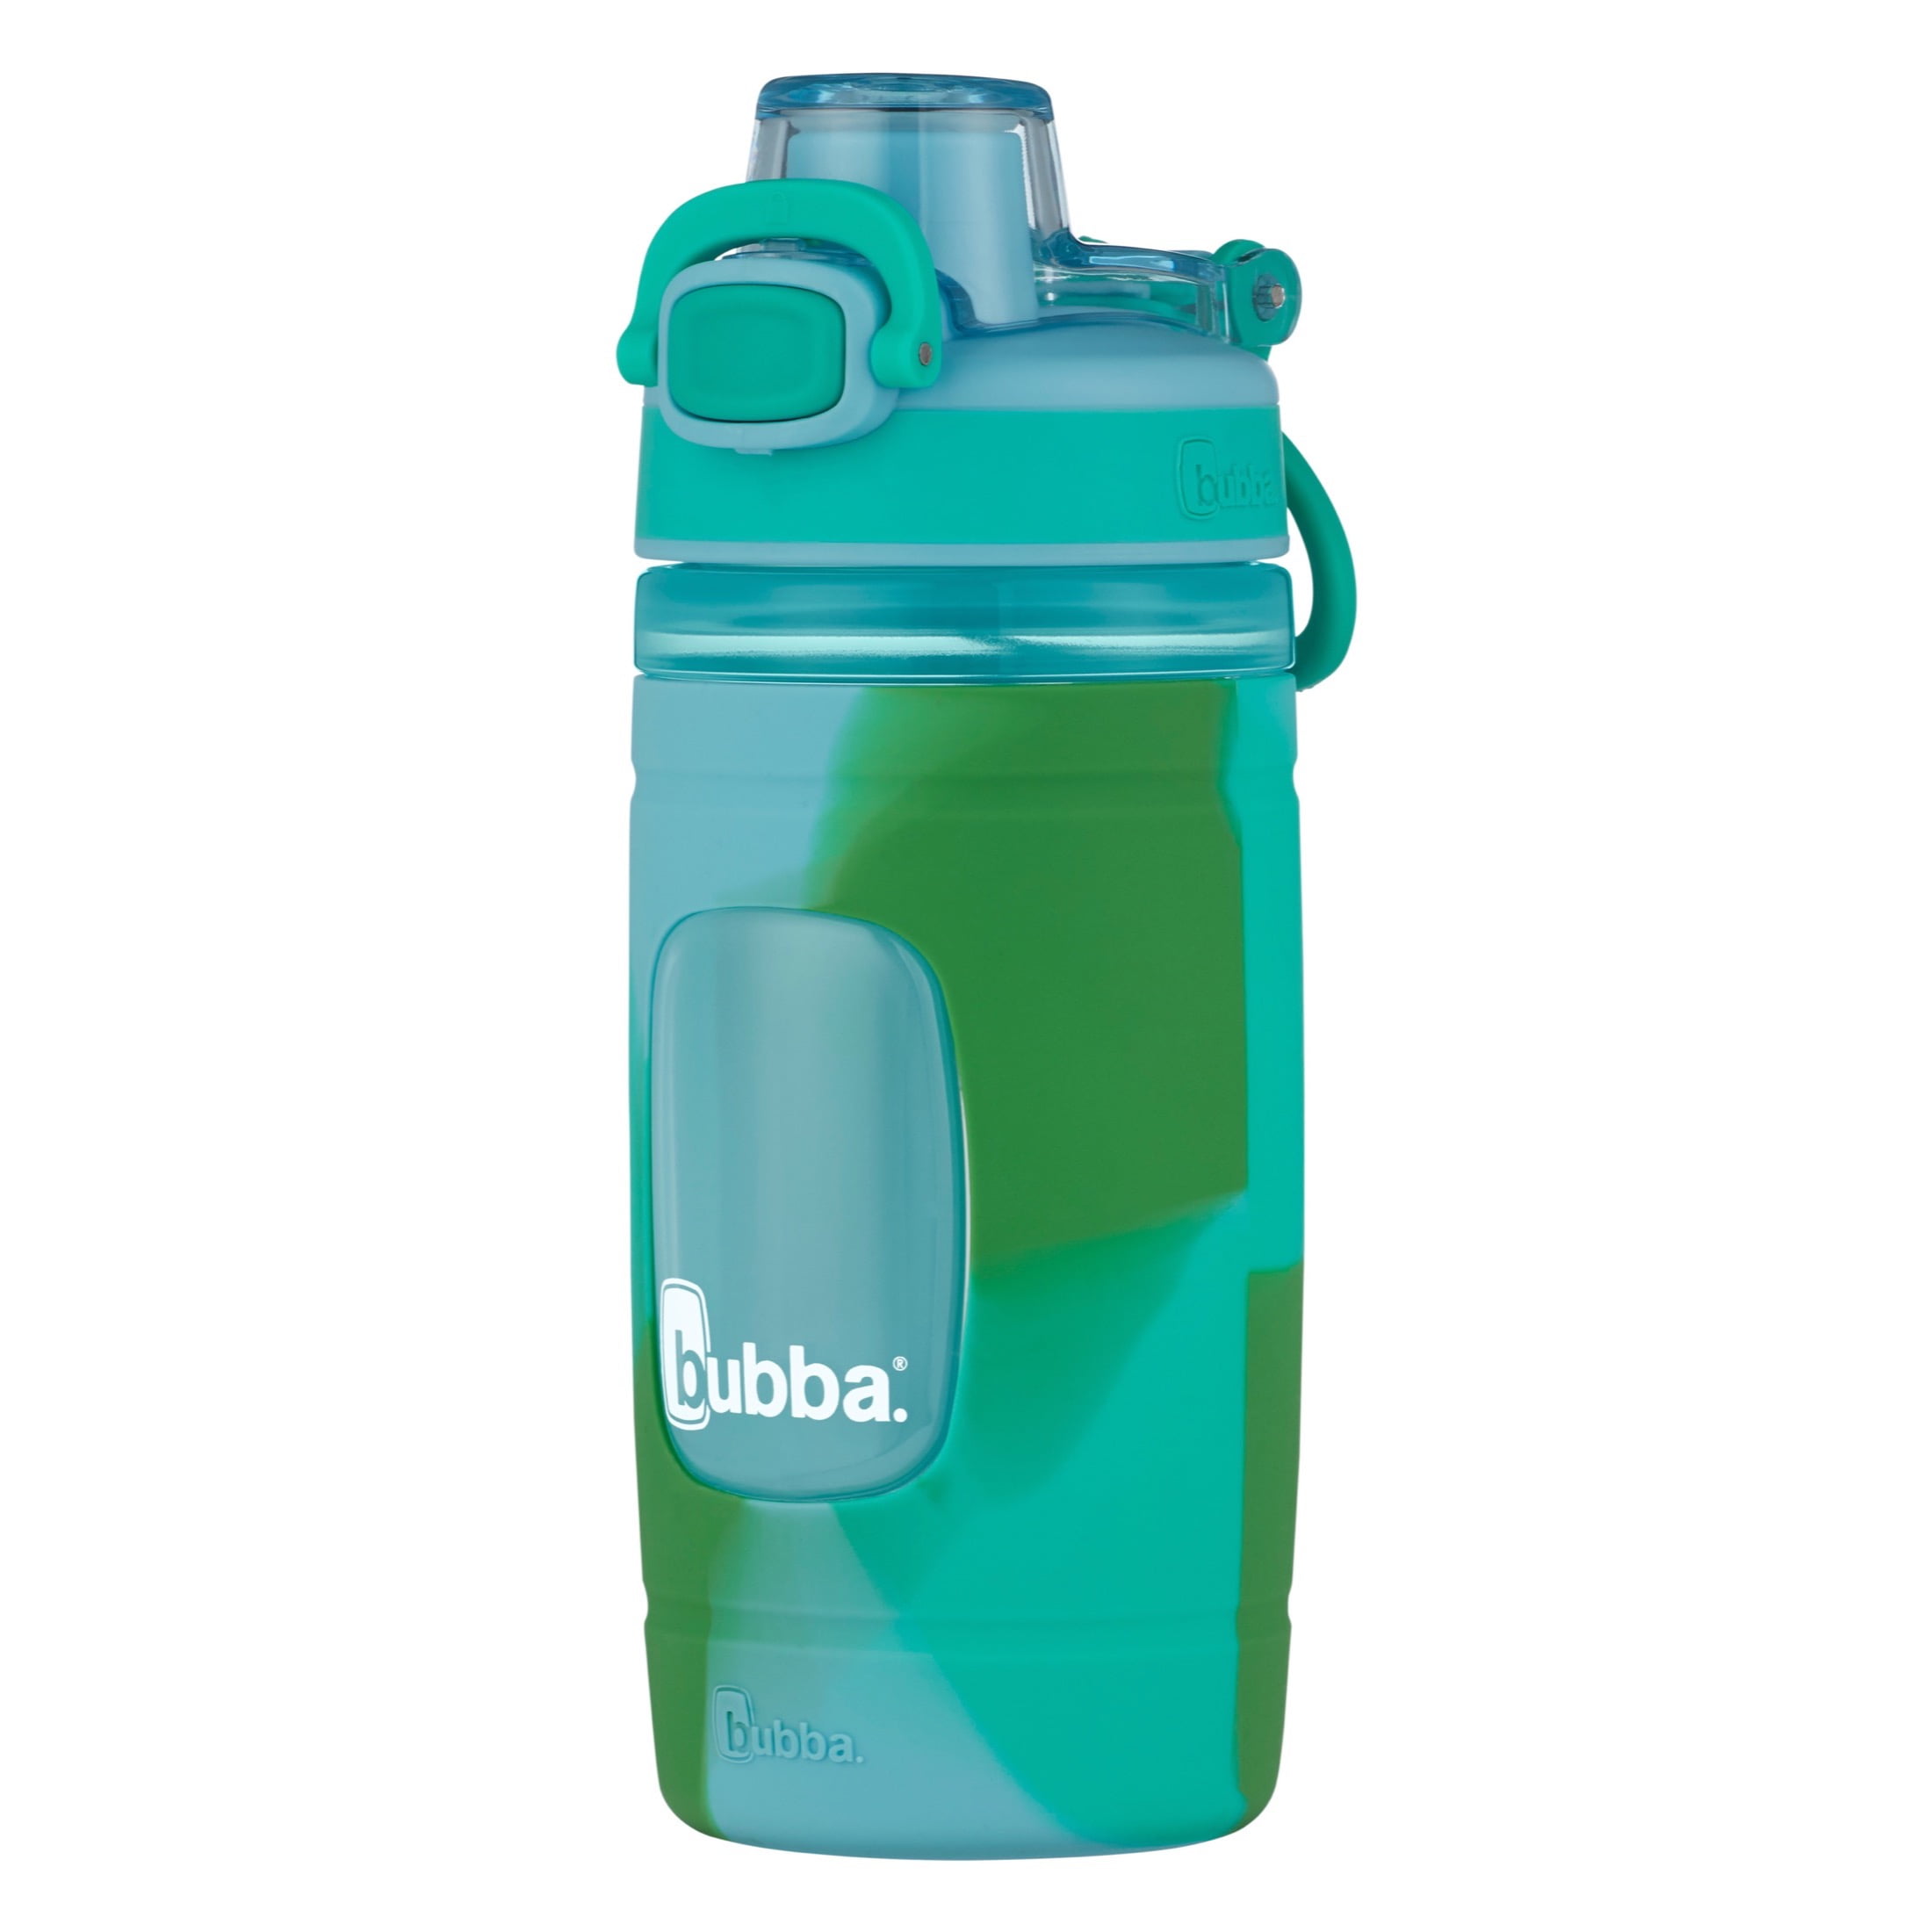  Bubba Flo Kids Water Bottle with Leak-Proof Lid, 16oz  Dishwasher Safe Water Bottle for Kids, Impact and Stain-Resistant, Azure :  Sports & Outdoors